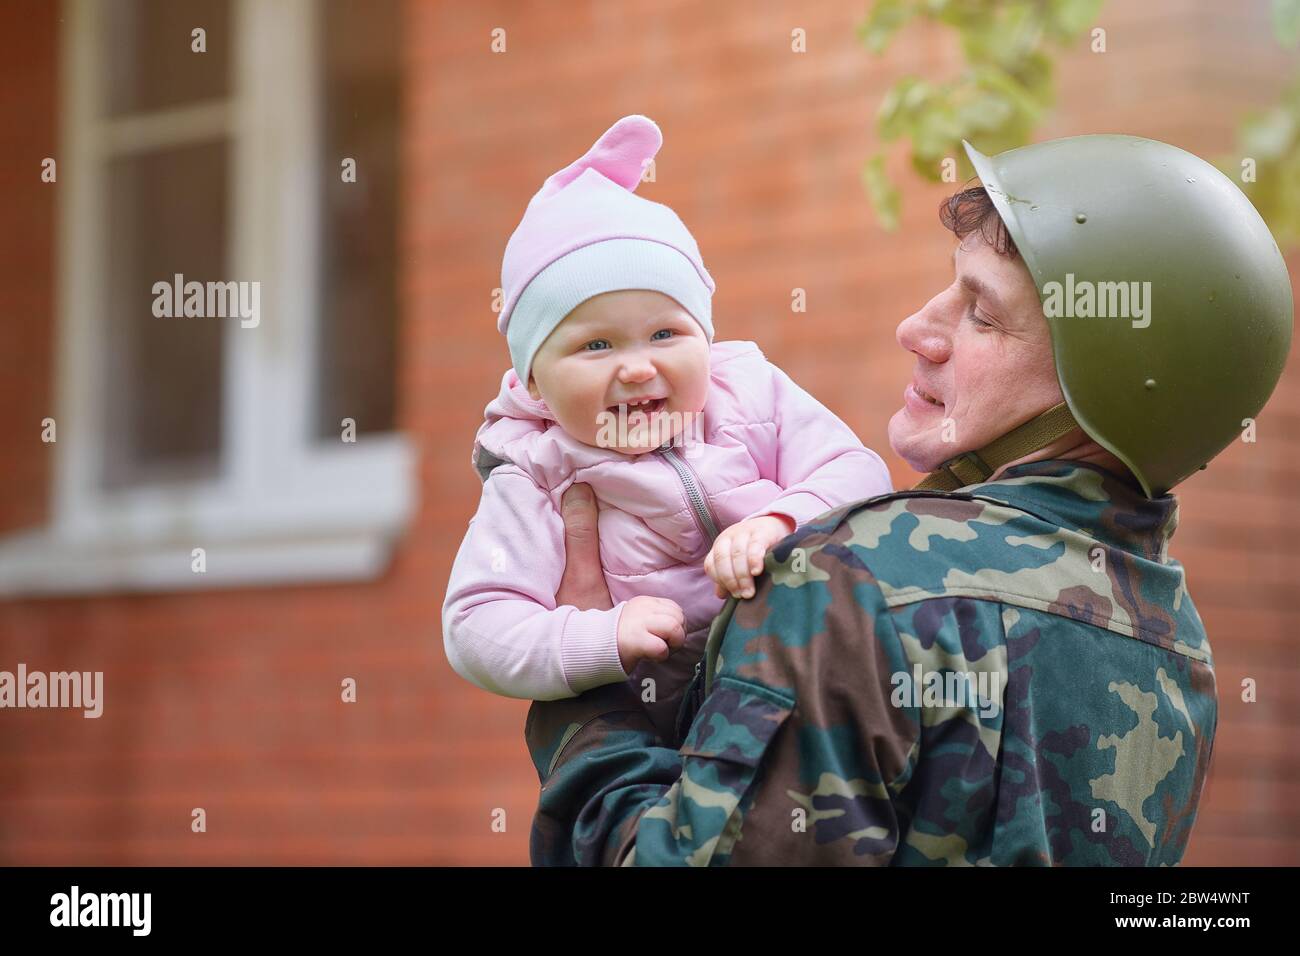 Military man in a helmet with a smiling little baby in his arms Stock Photo